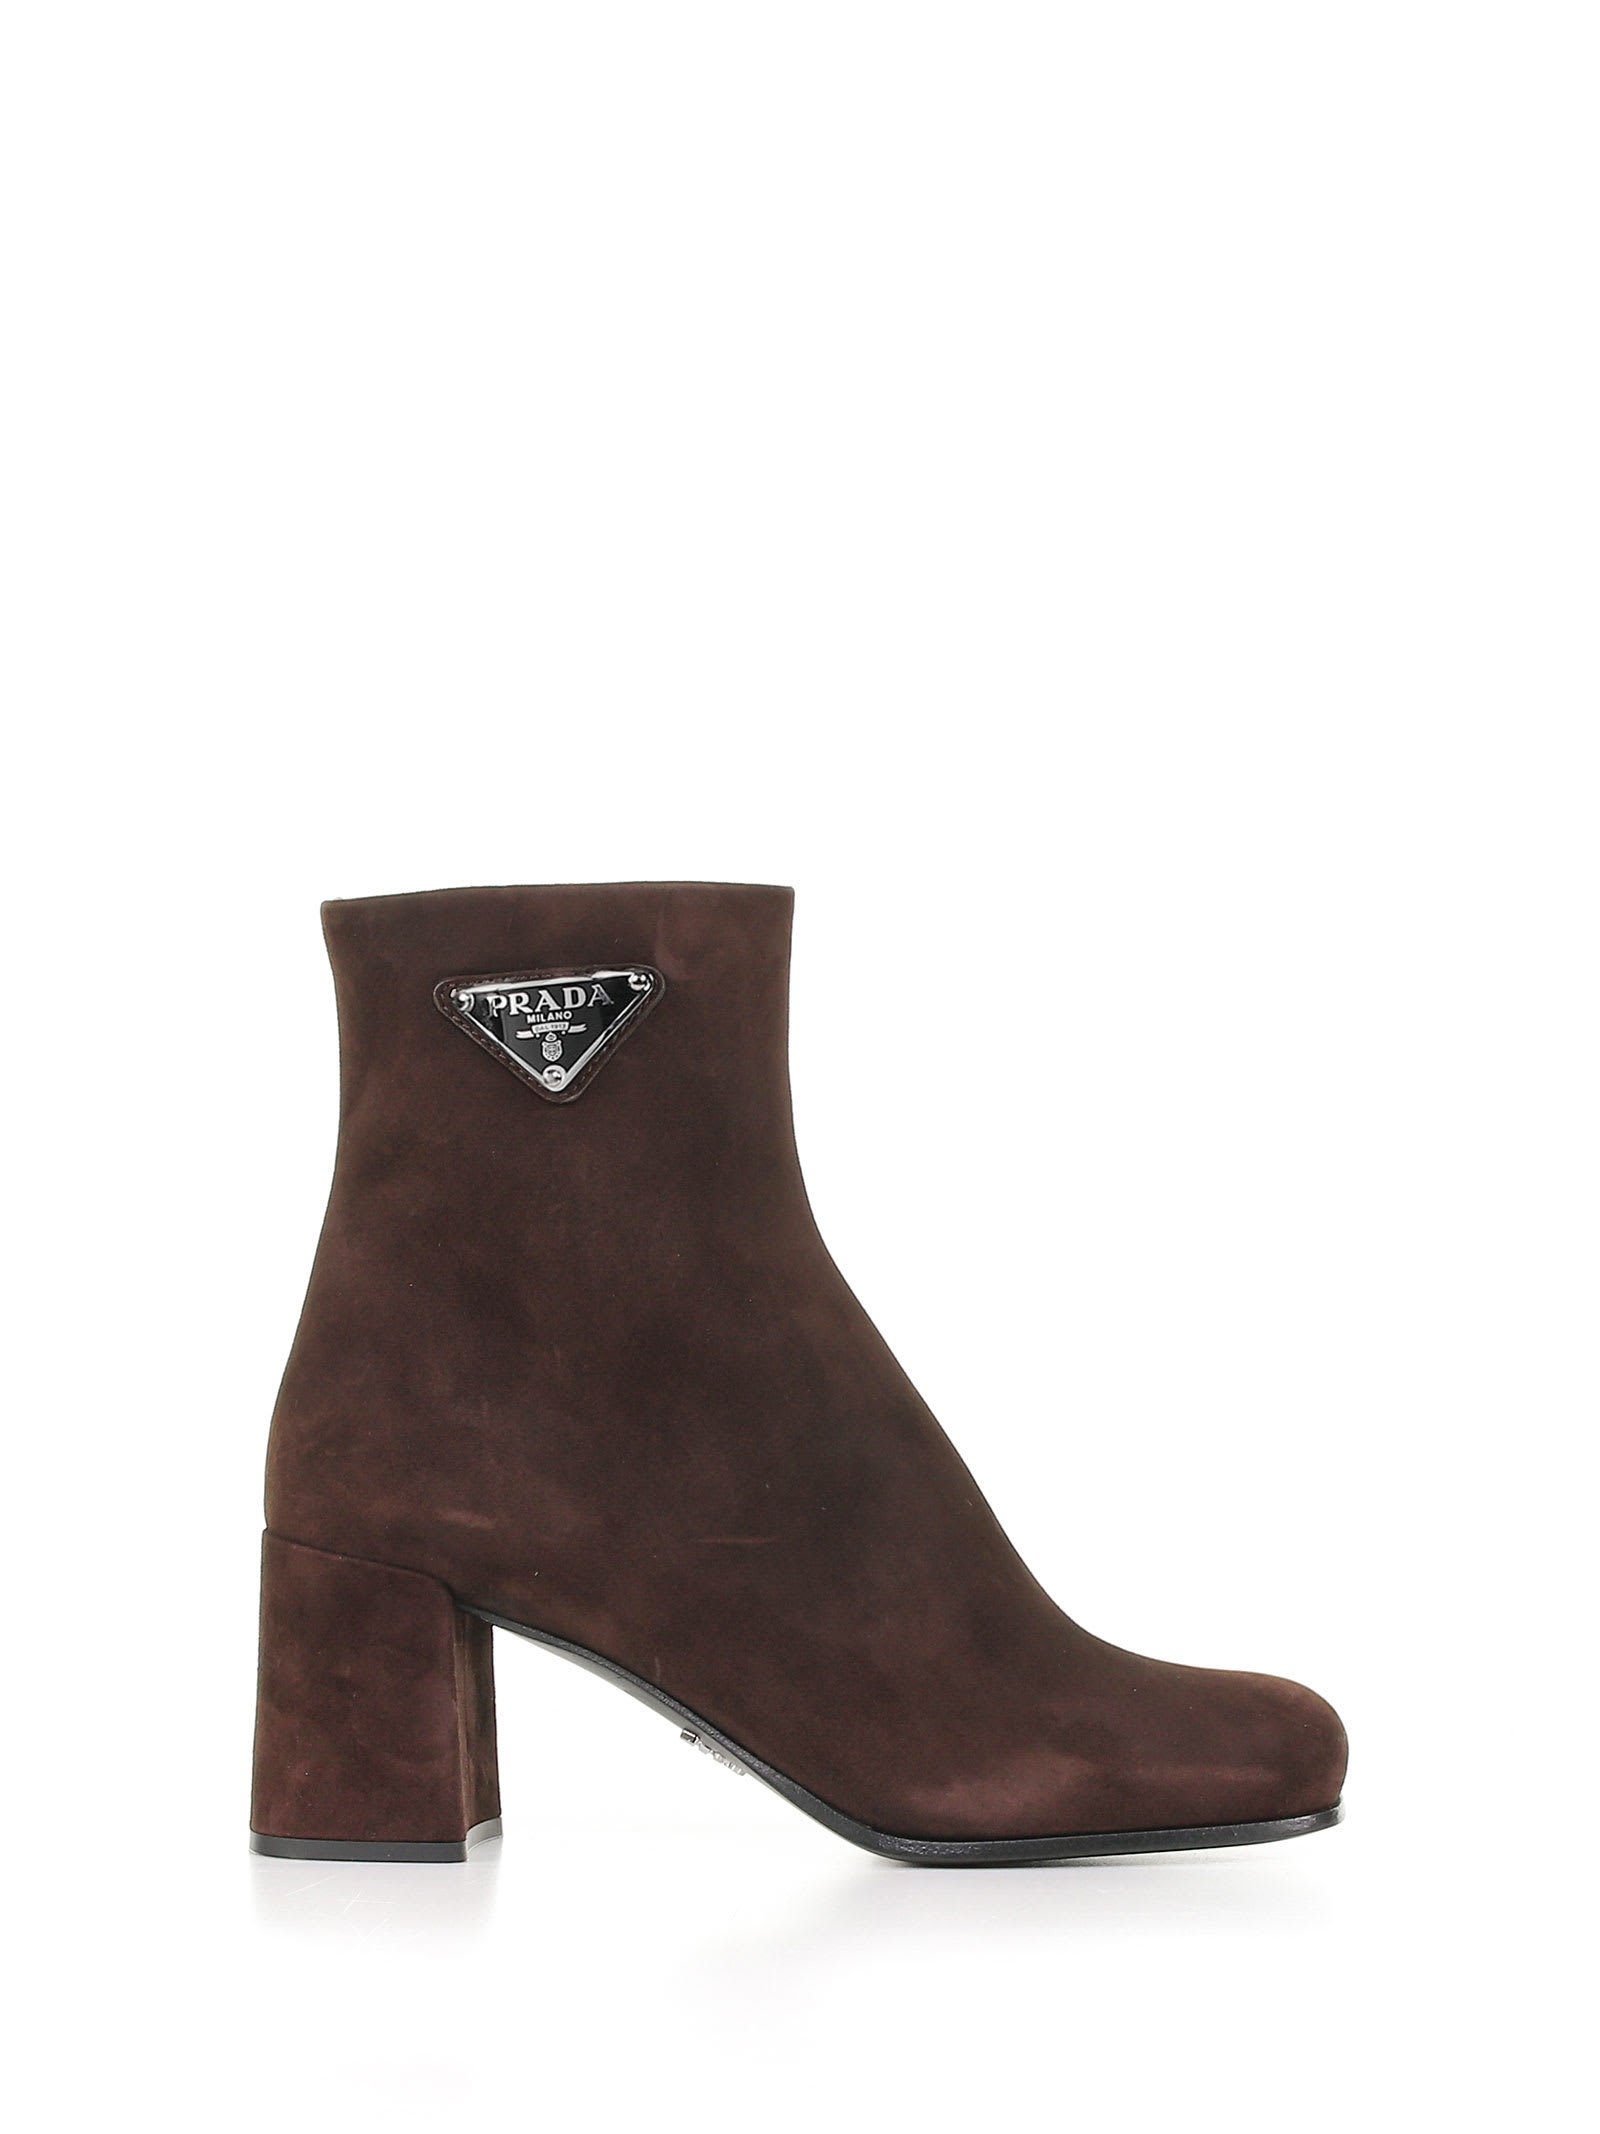 Prada Suede Ankle Boot With Heel